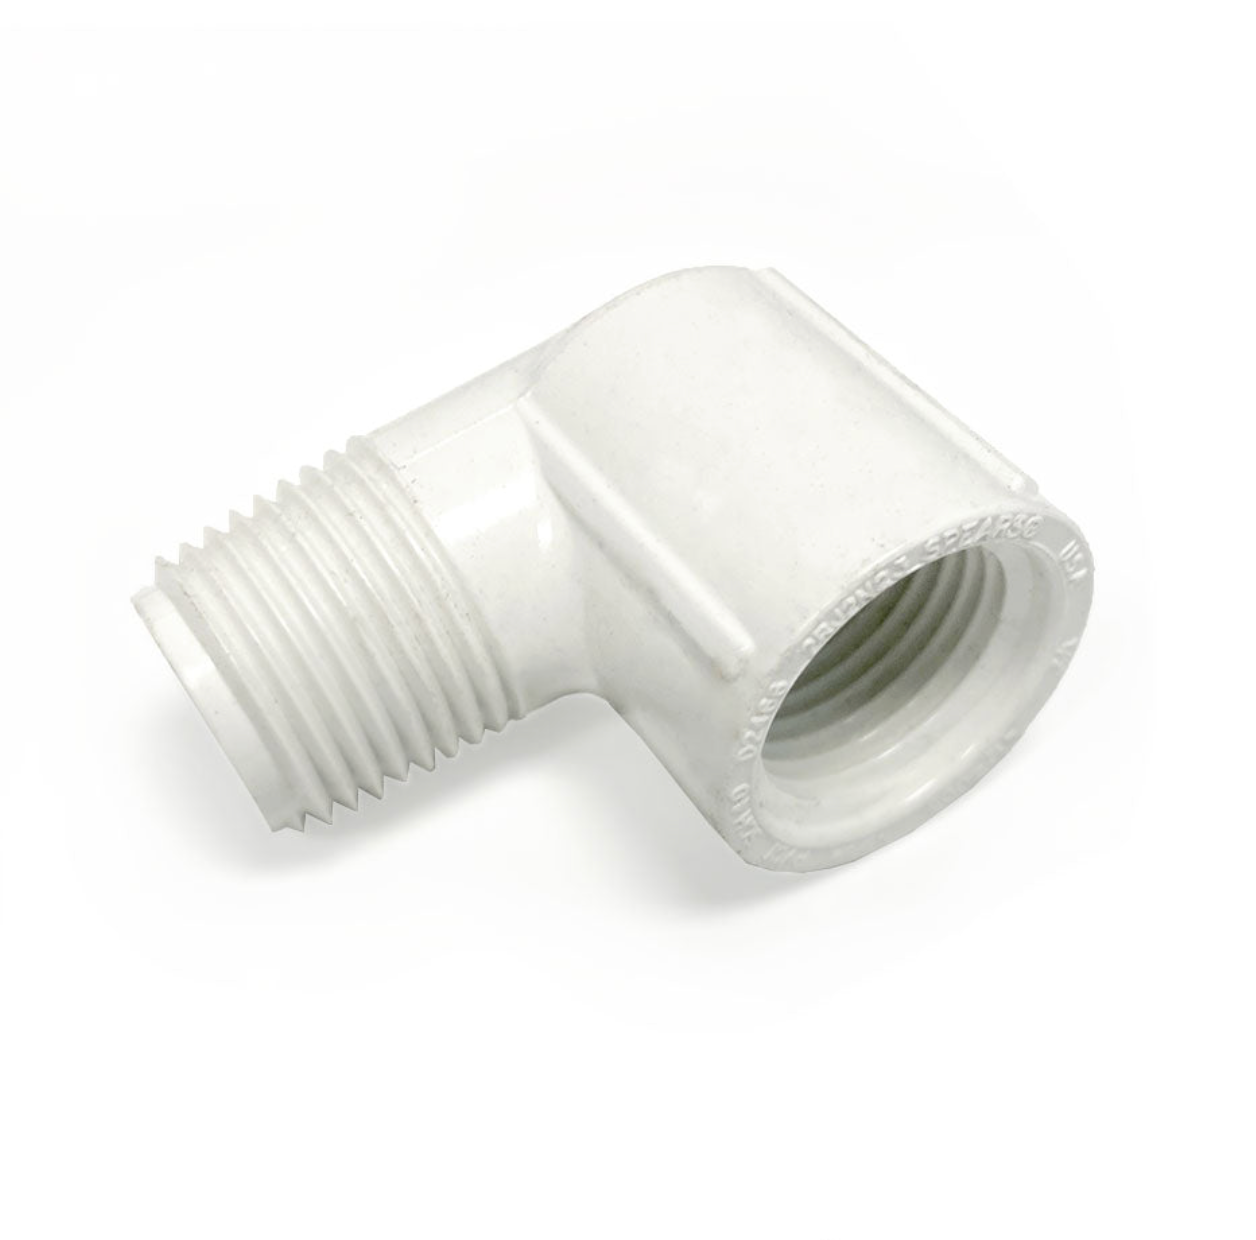 90-degree 1/2" threaded male to 1/2" threaded female fitting